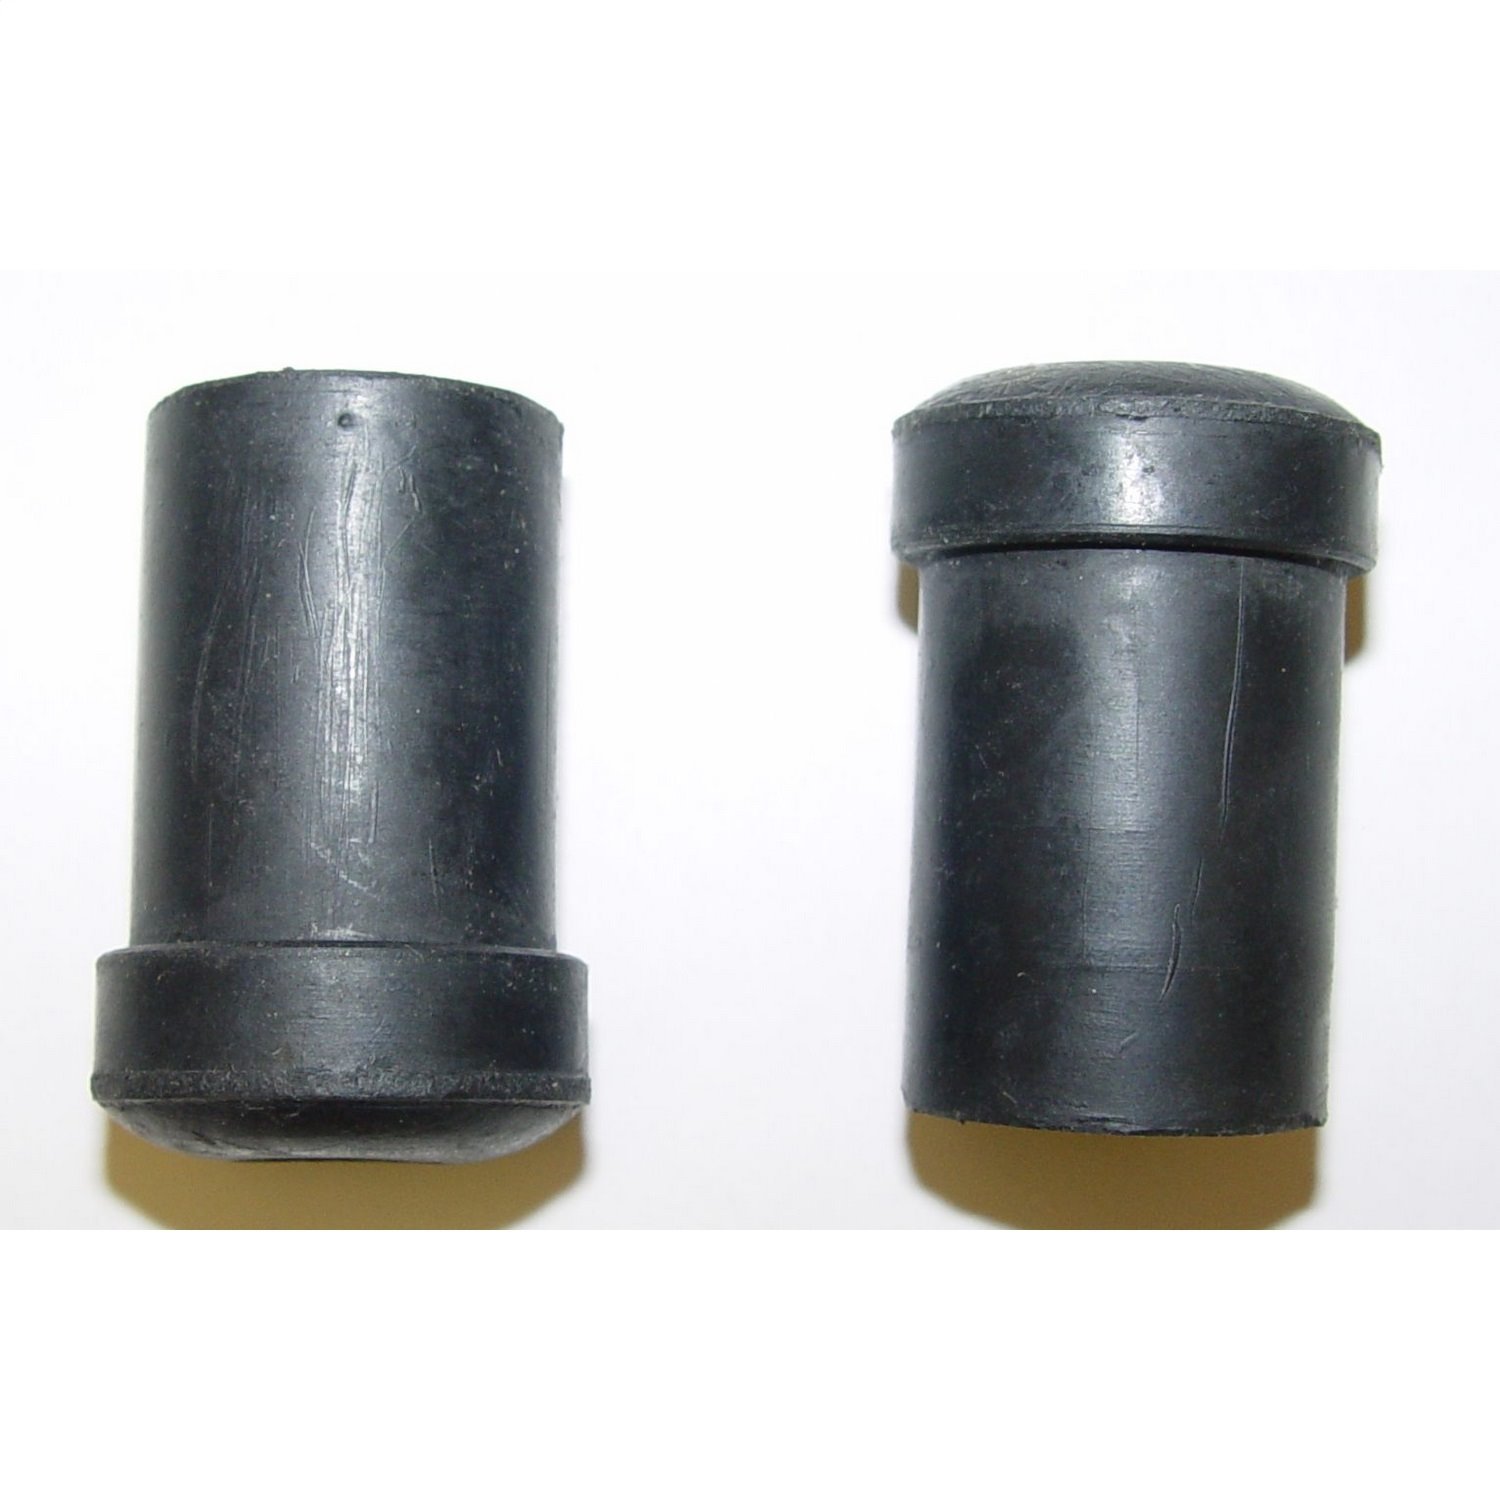 This rear leaf spring shackle bushing from Omix-ADA fits76-86 Jeep CJs. Sold individually. Two needed per shackle eye.